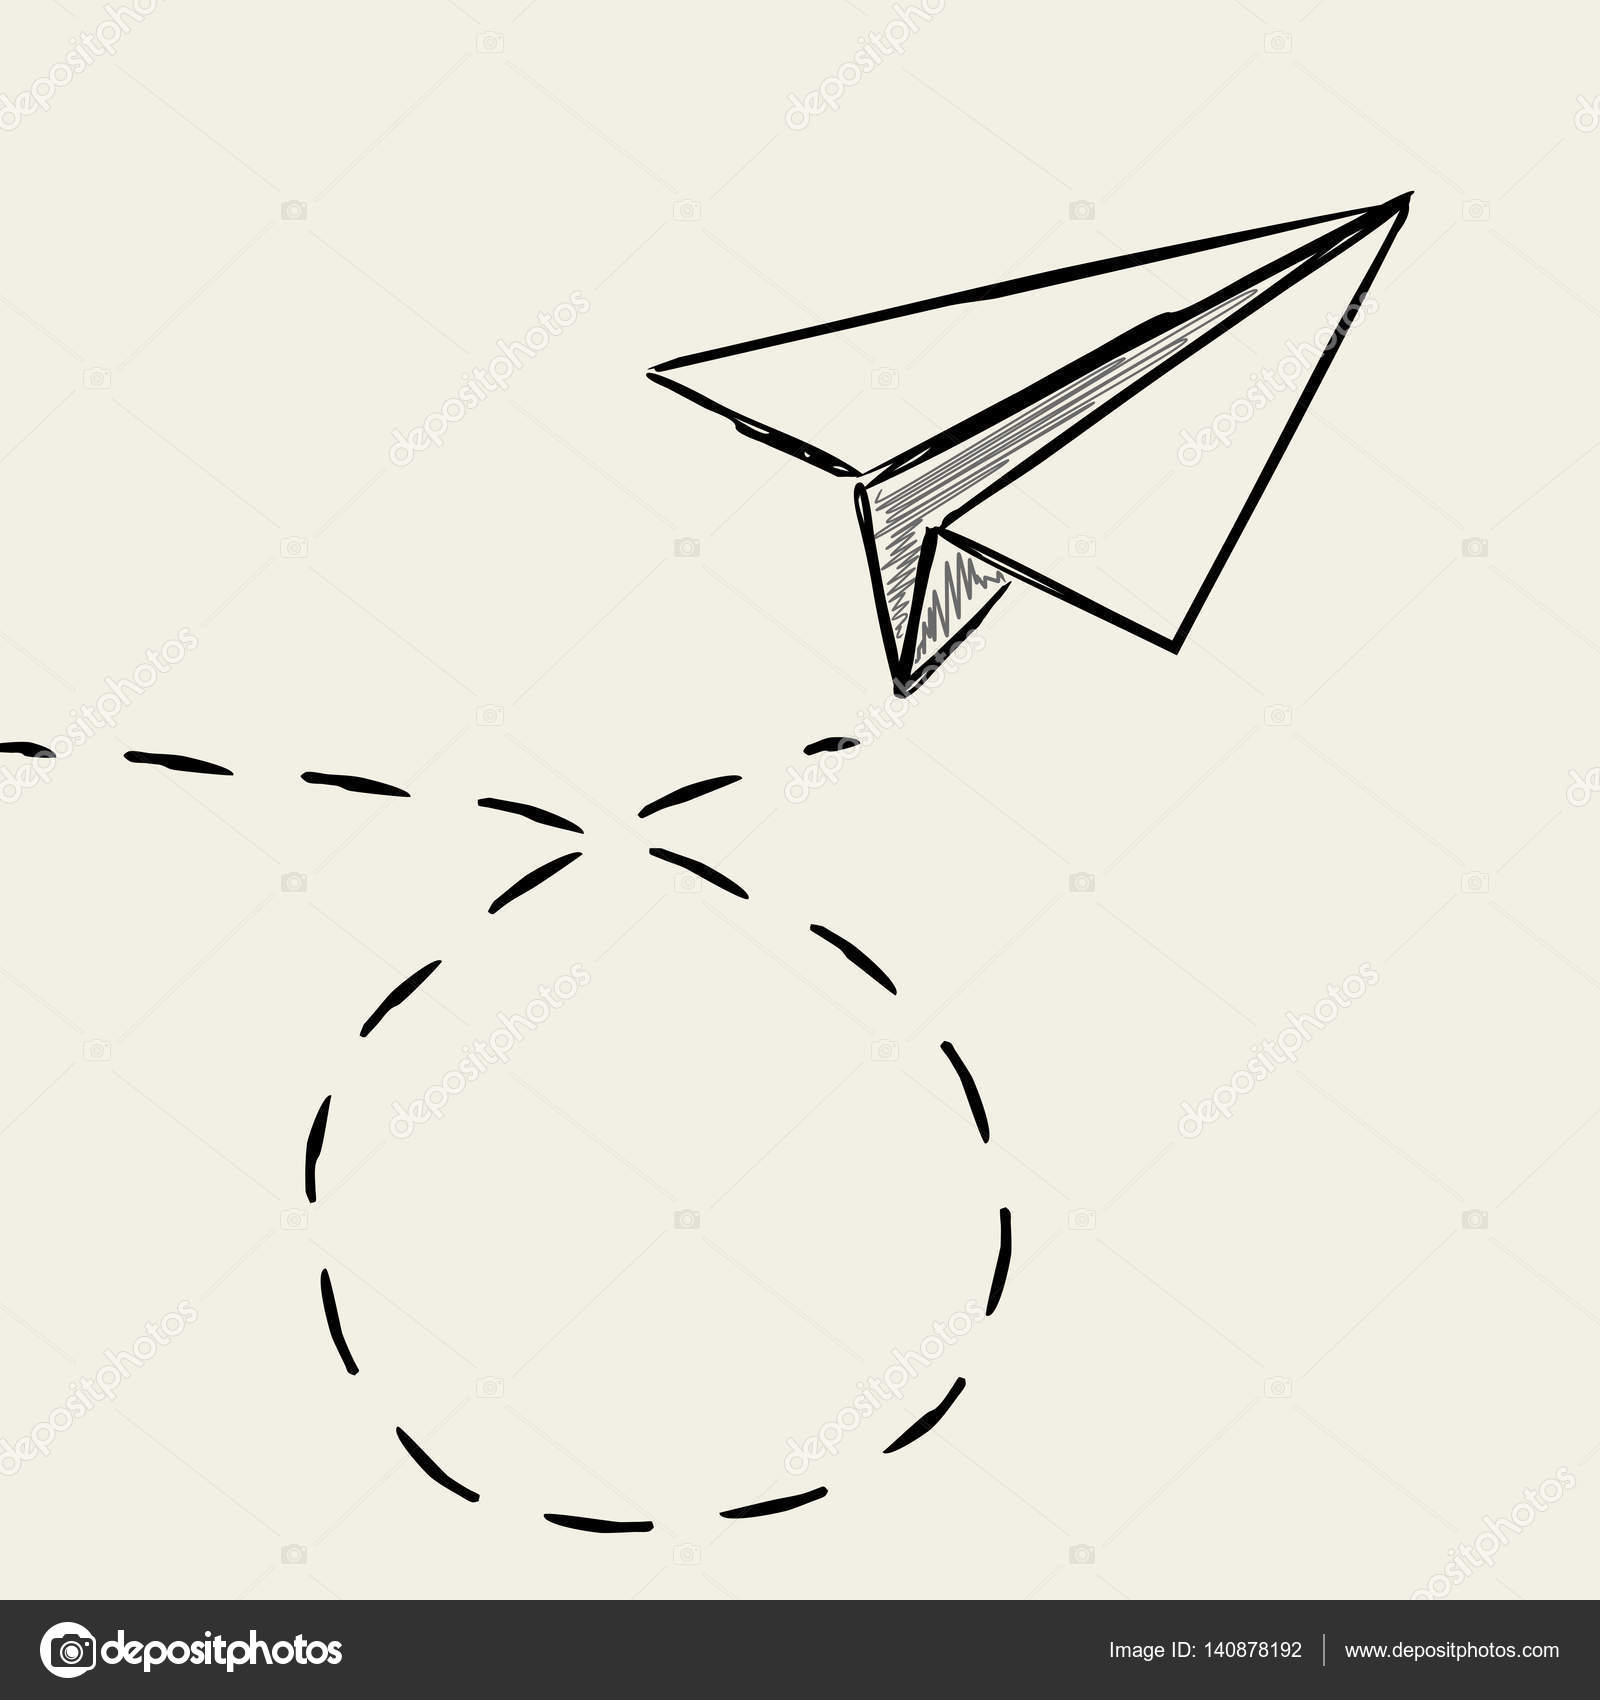 Paper plane drawing with dashed trace line. — Stock Vector © lenapix ...